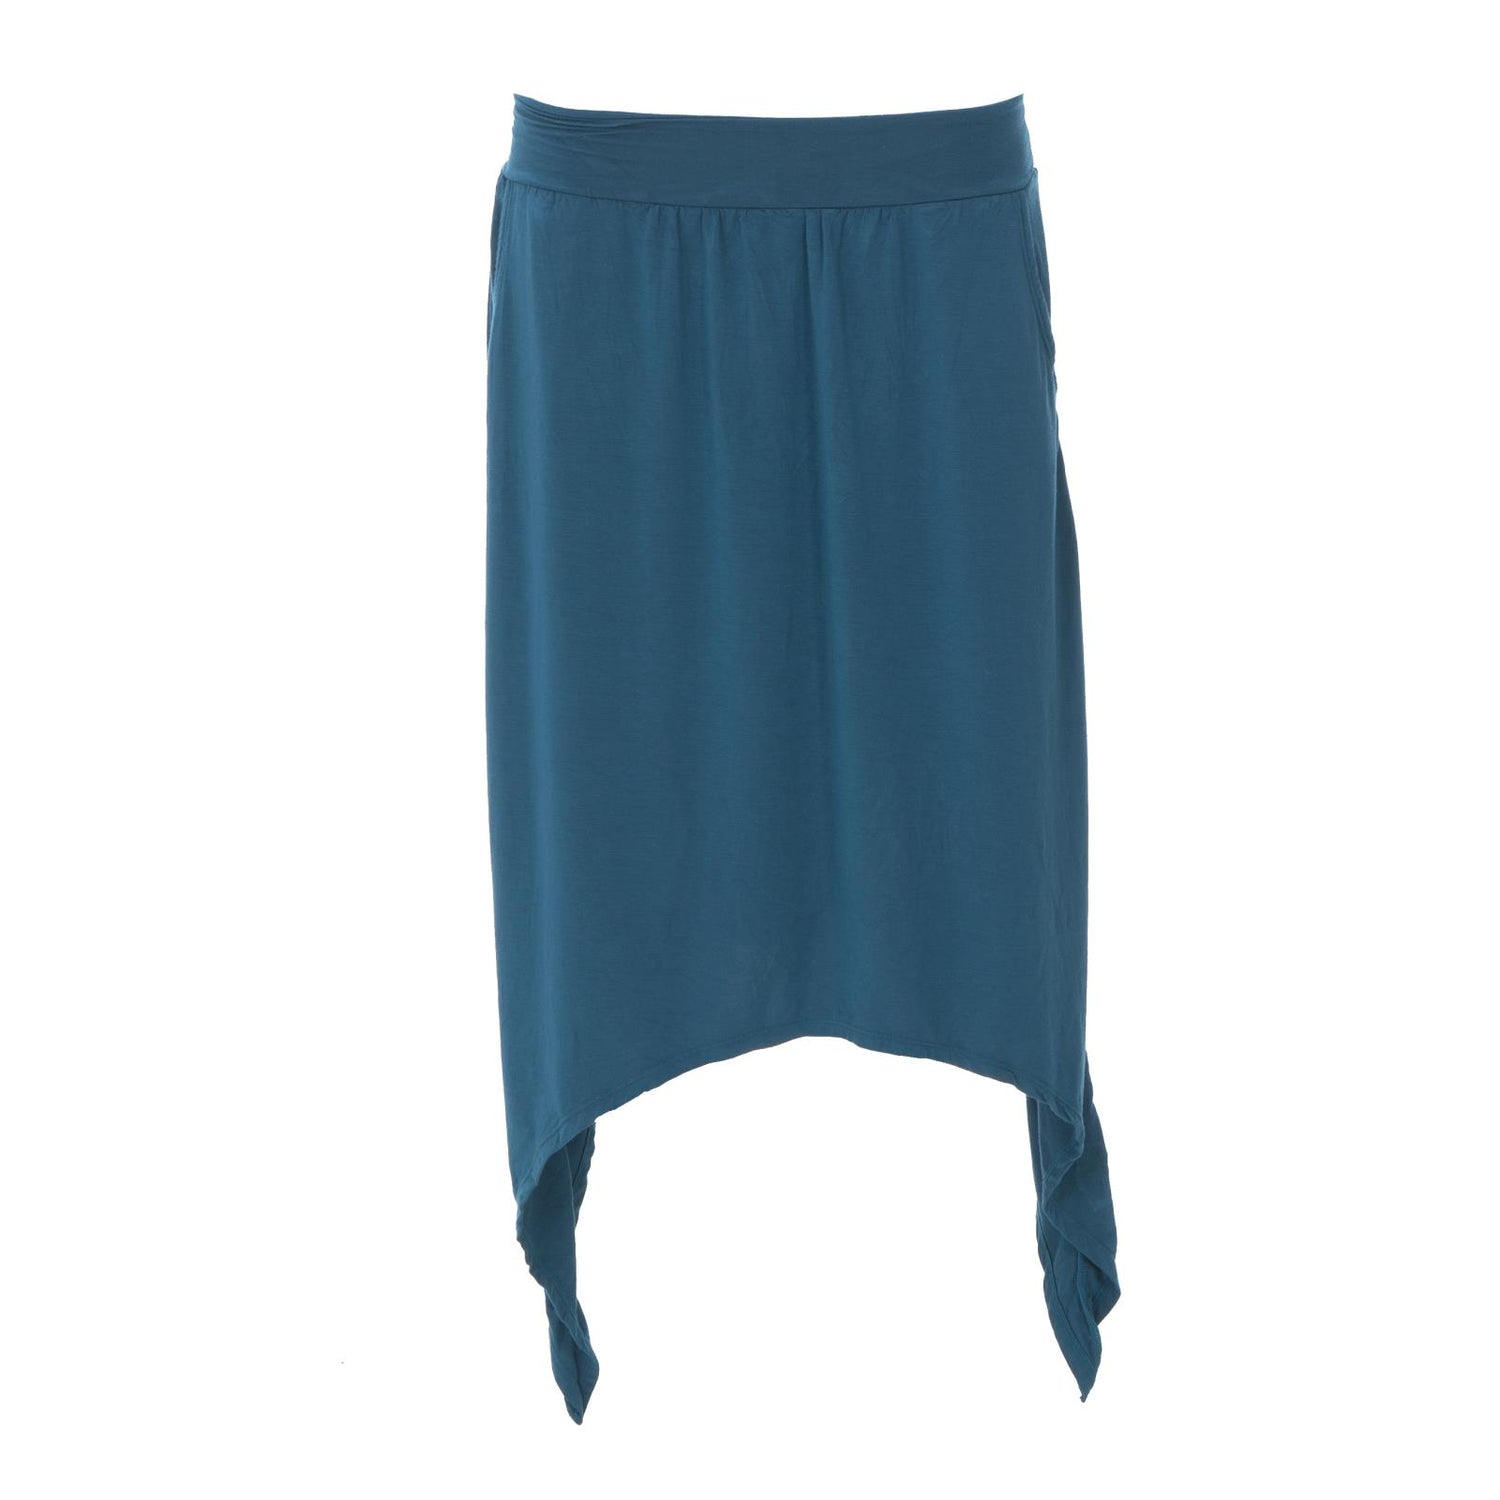 Women's Solid Side-Tailed Skirt in Heritage Blue